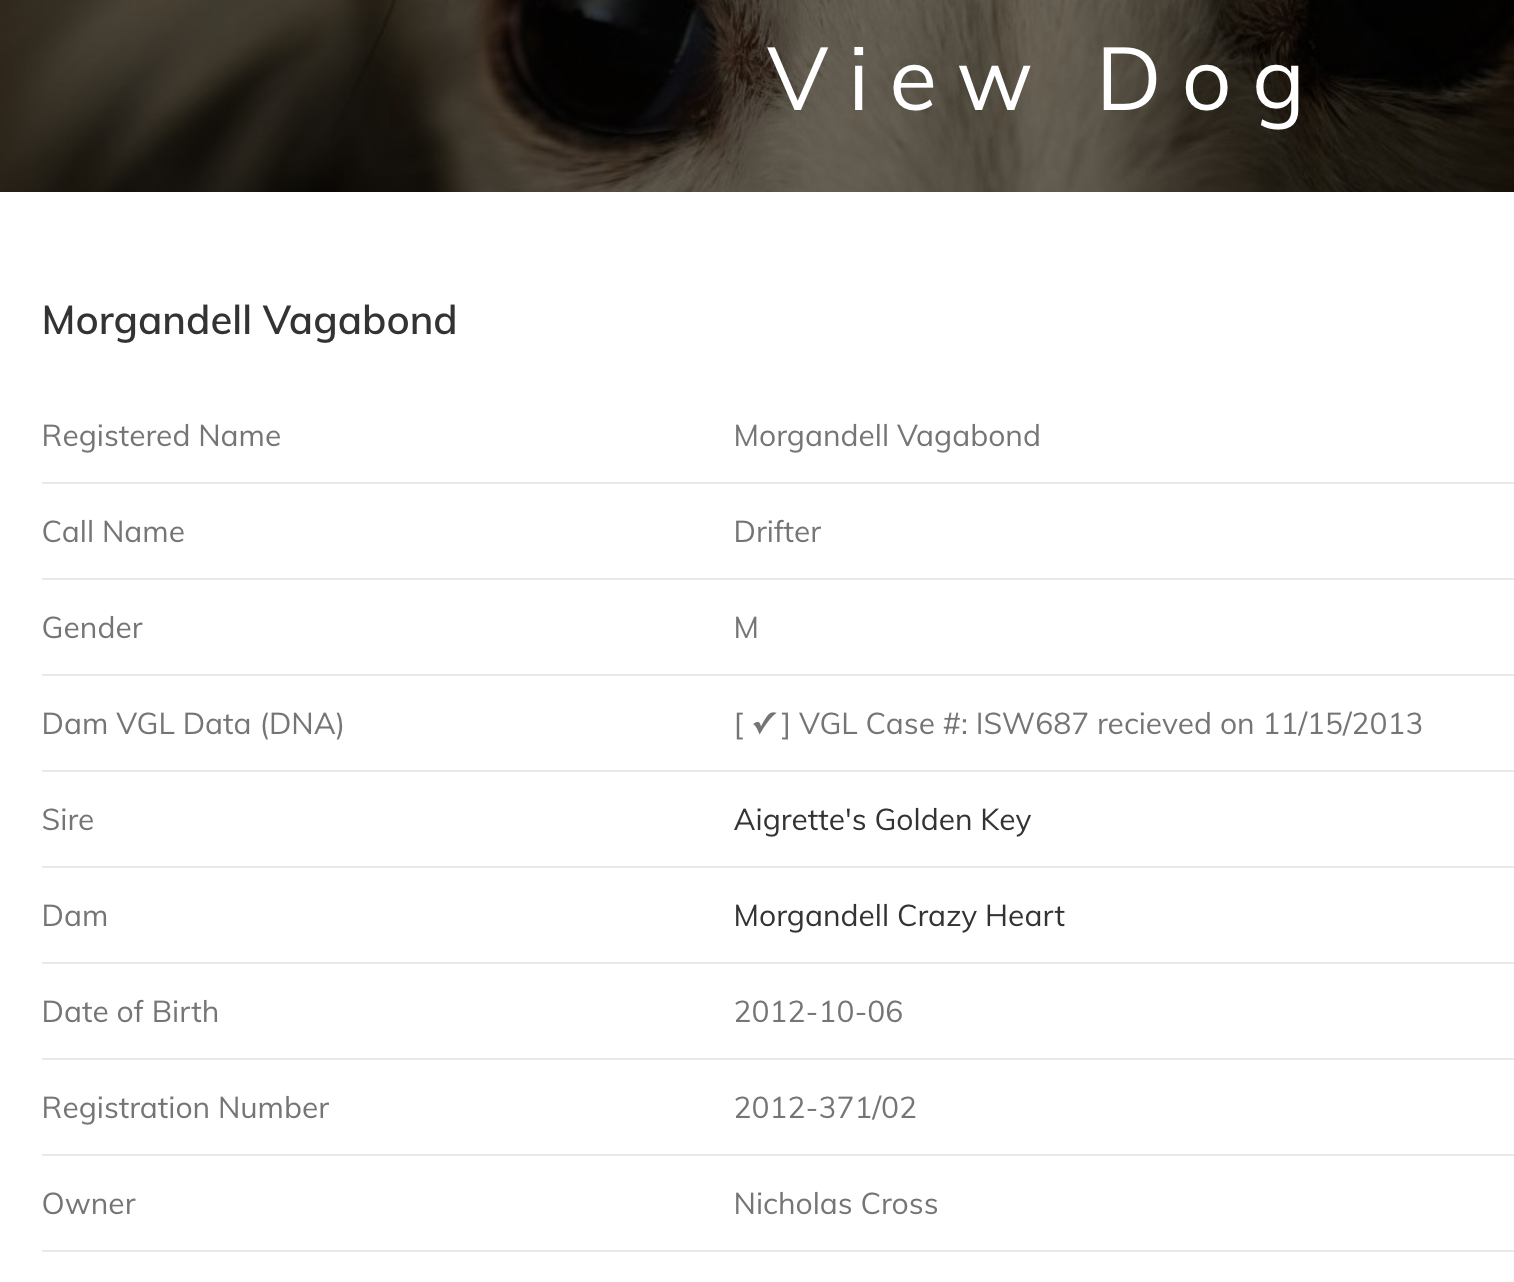 An example of the view dog page